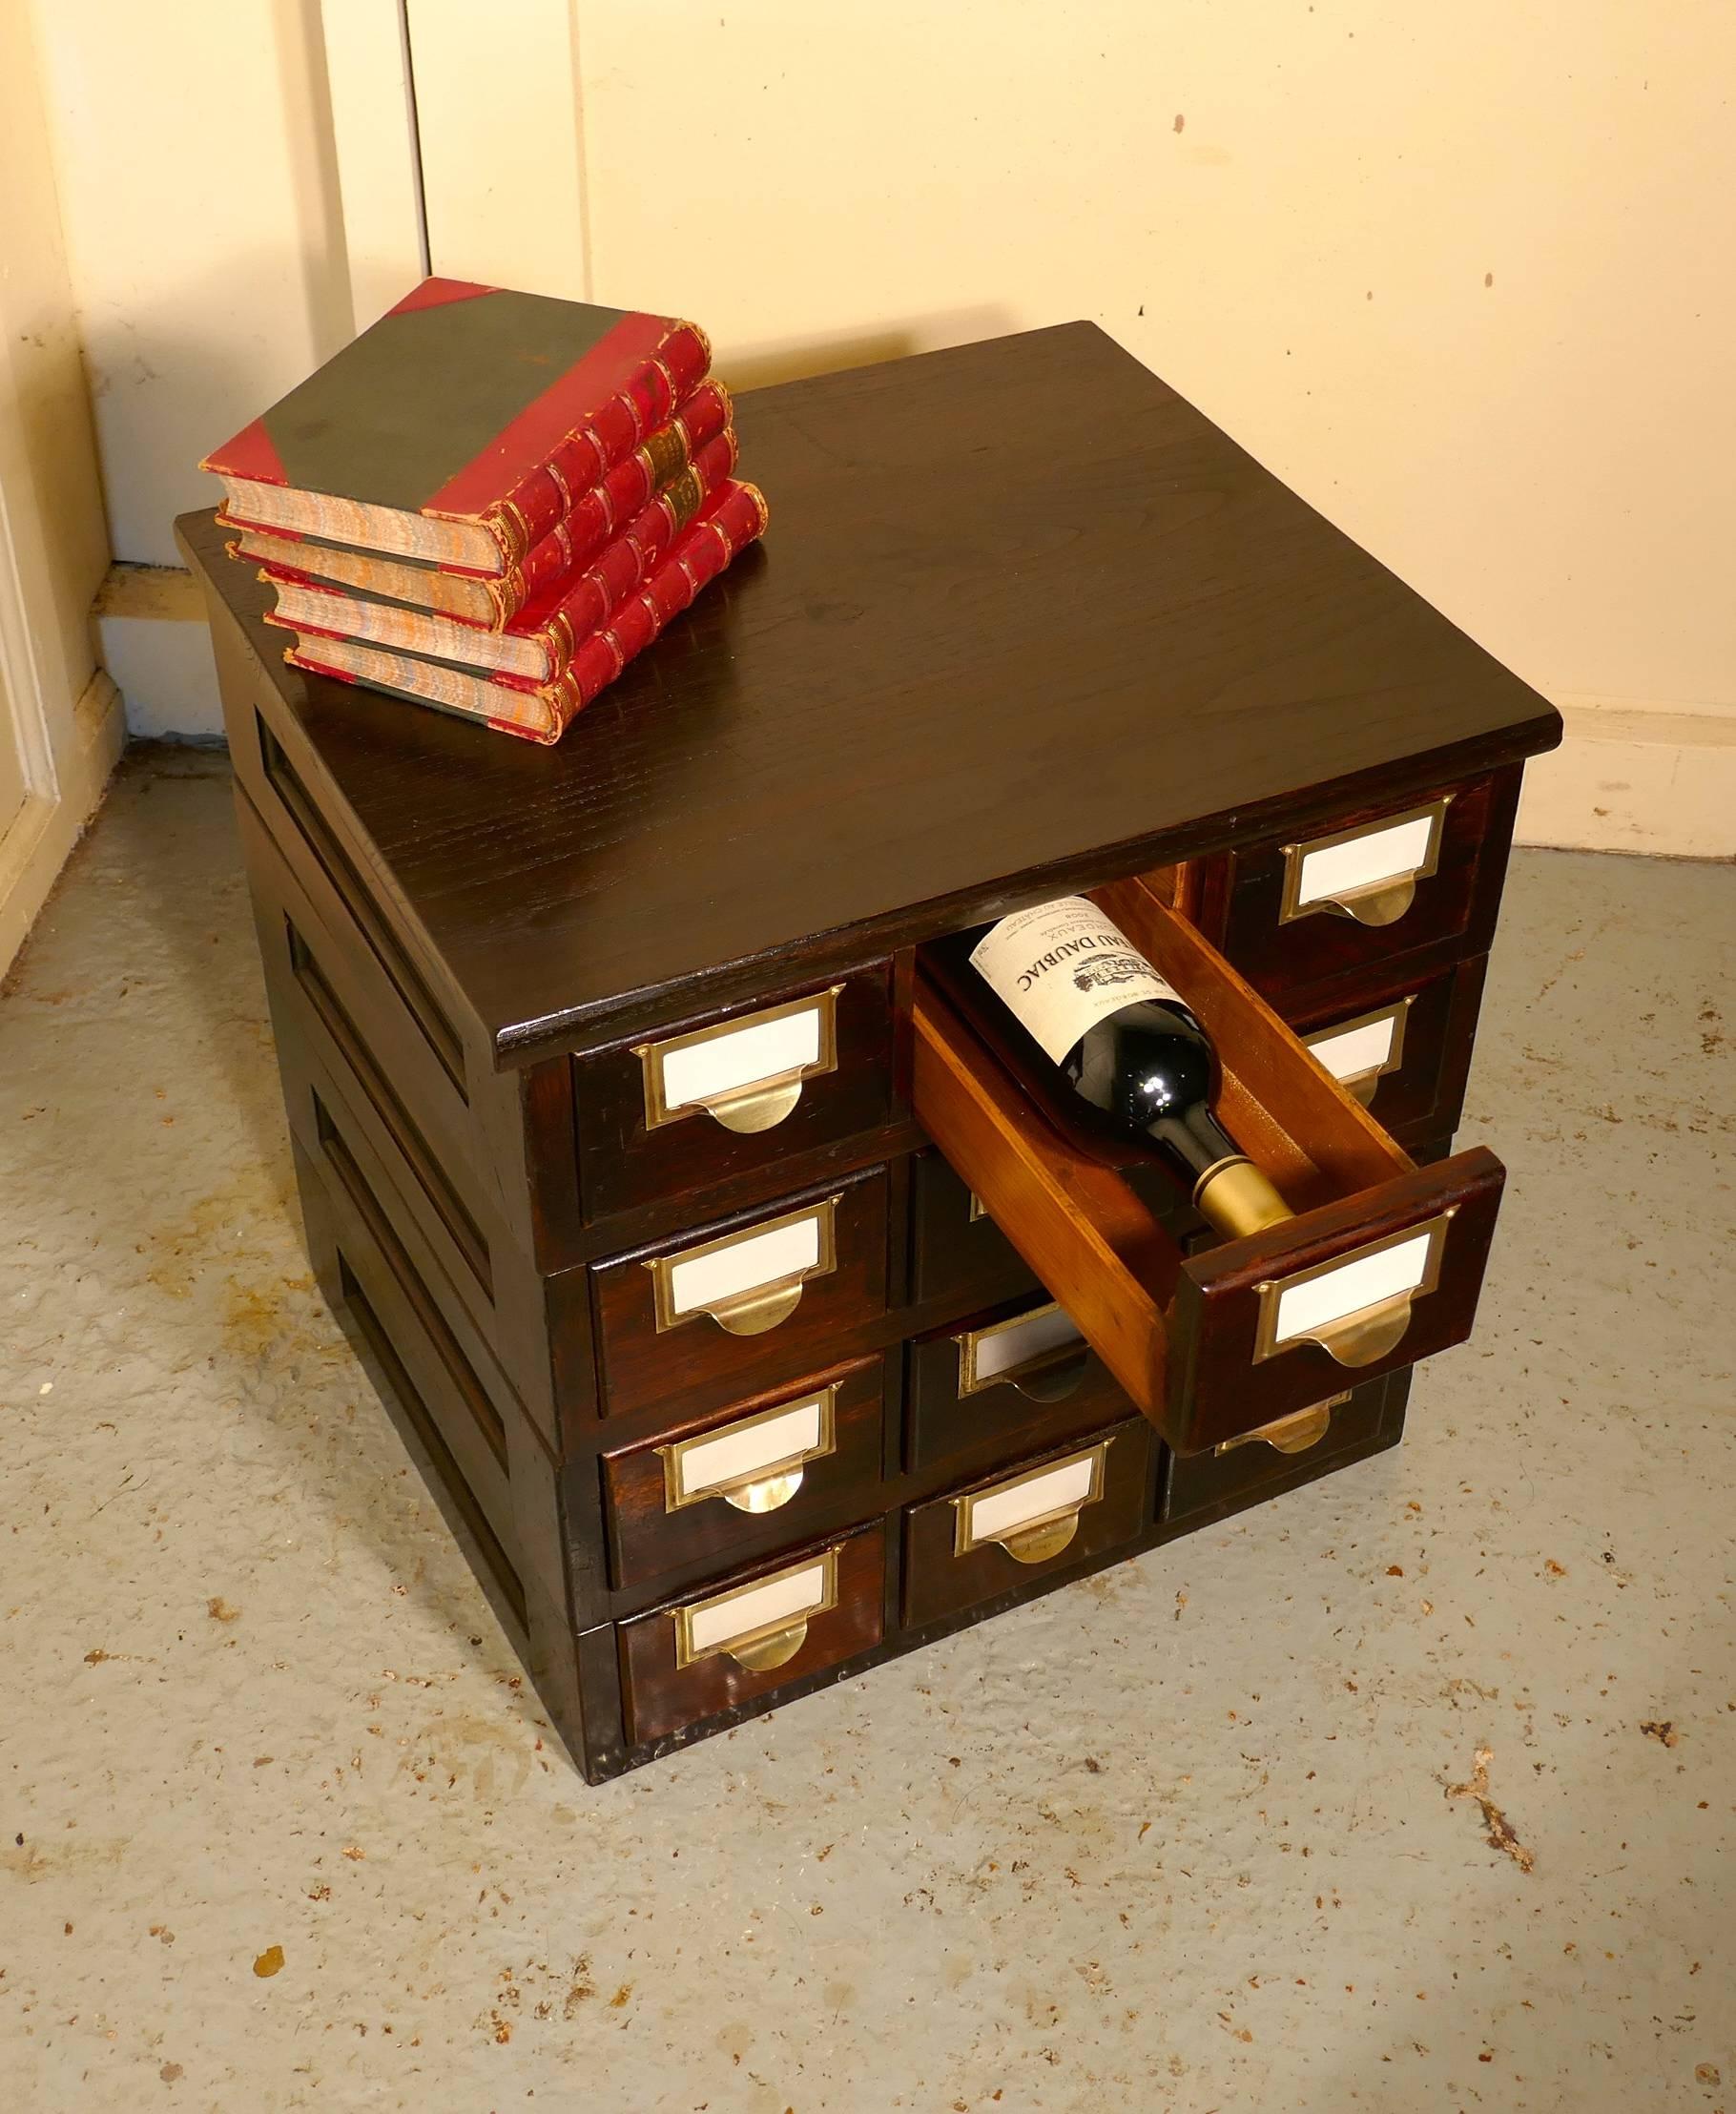 12 Drawer Oak Card Index Filing Cabinet, Wine Rack
 
The Cabinet has 4 rows of 3 drawers, each with a brass handle / name plate holder

The cabinet is in sound original condition all the drawers work smoothly  and the drawers are just the right size